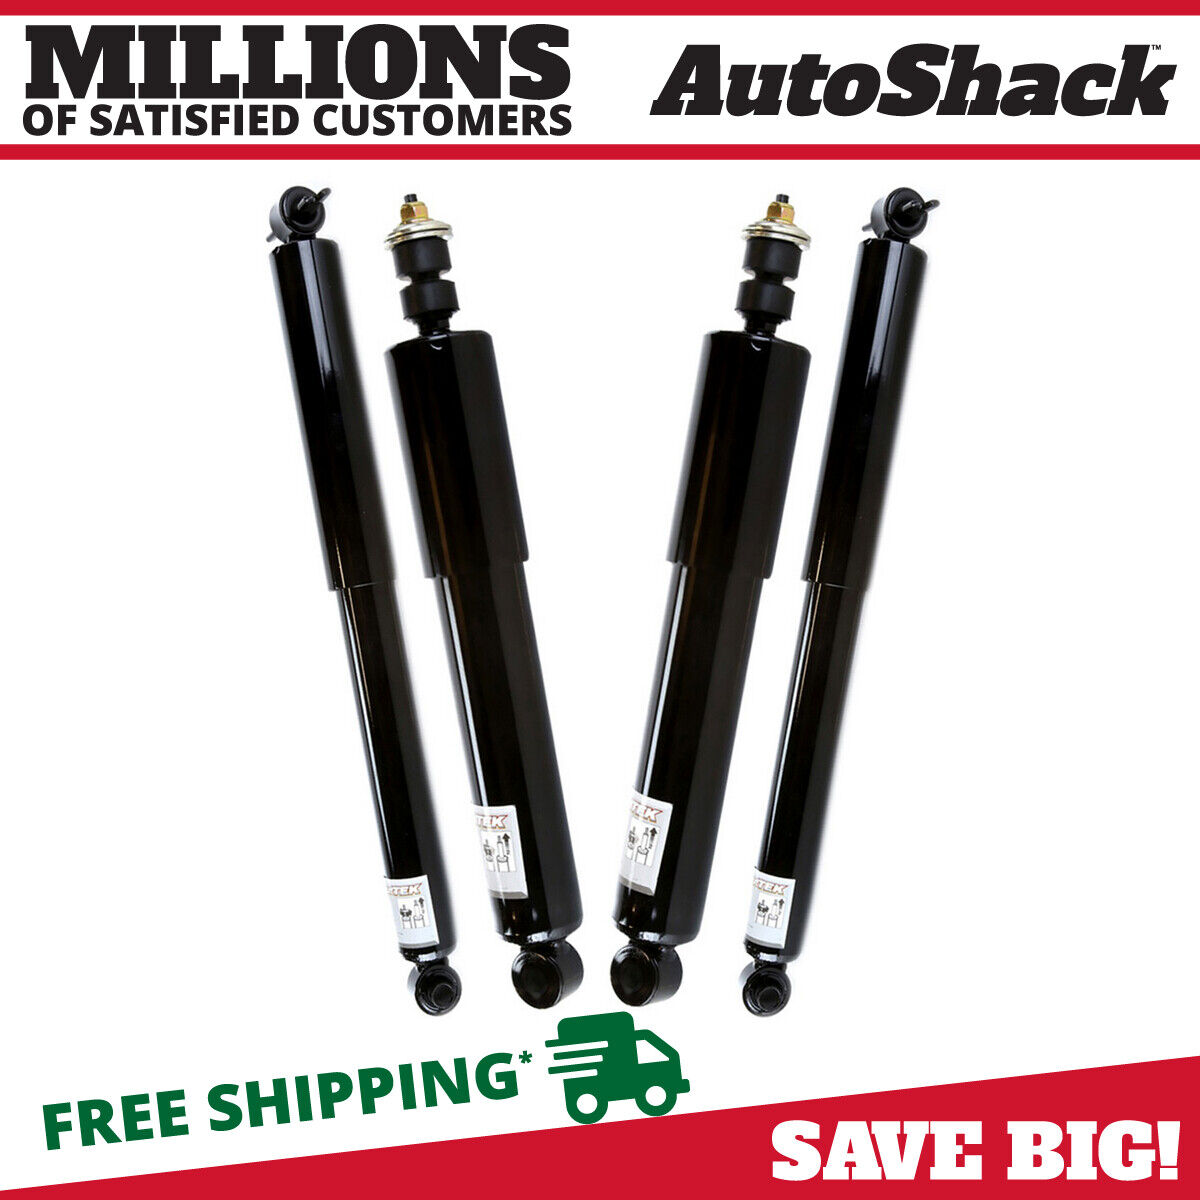 Front & Rear Shock Absorbers Set of 4 for Chevy Colorado GMC Canyon Isuzu i-370